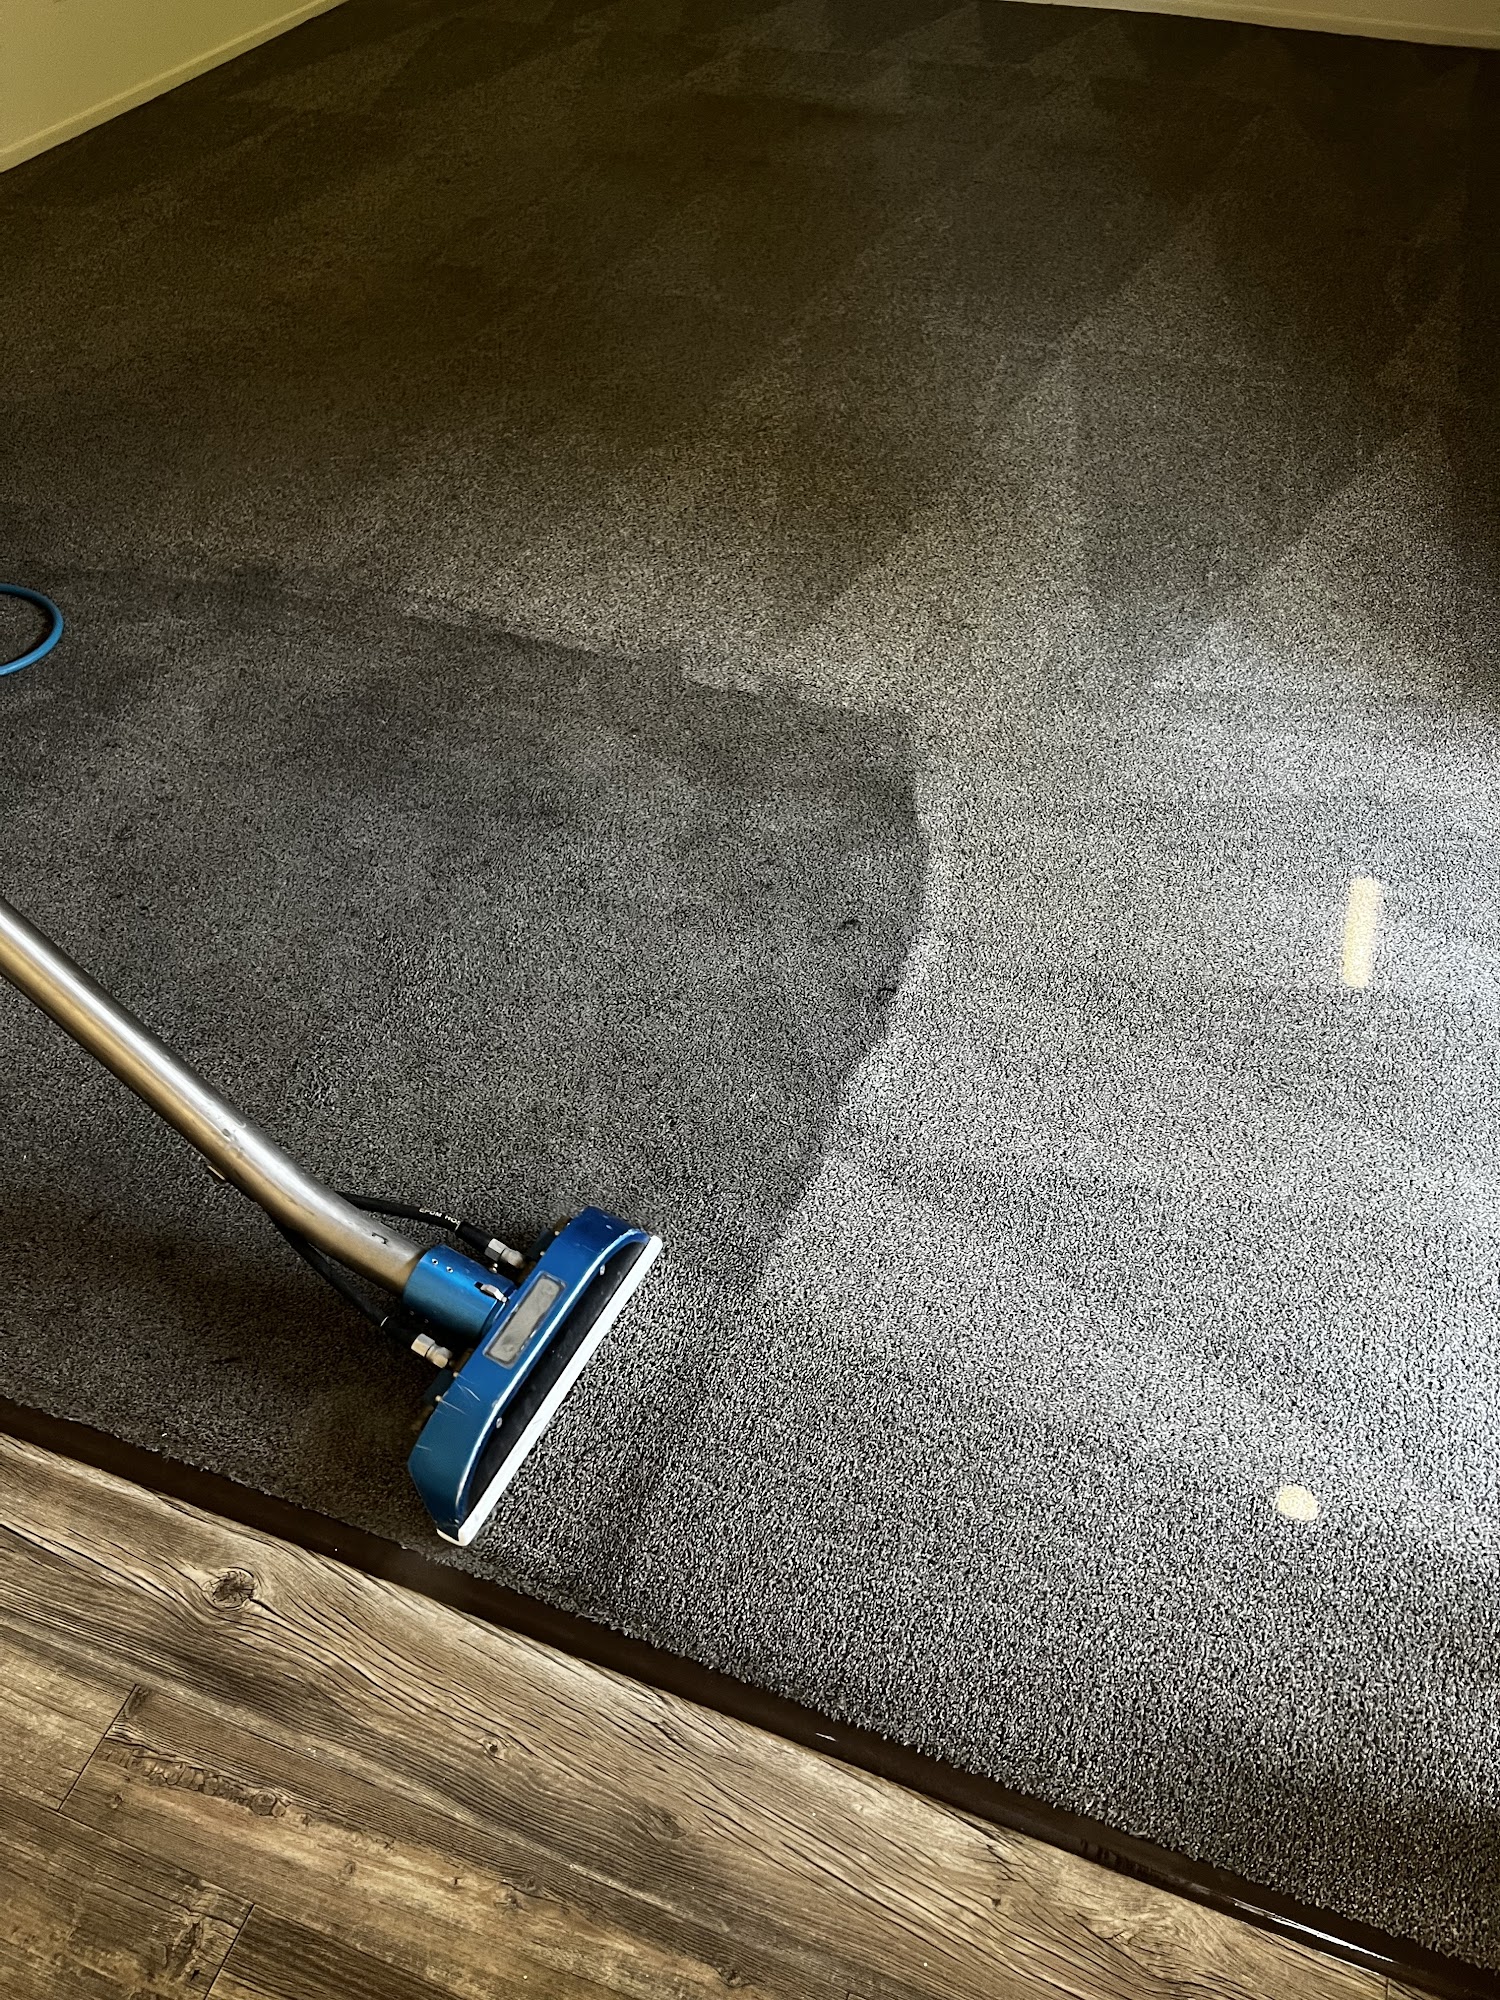 Master carpet cleaning